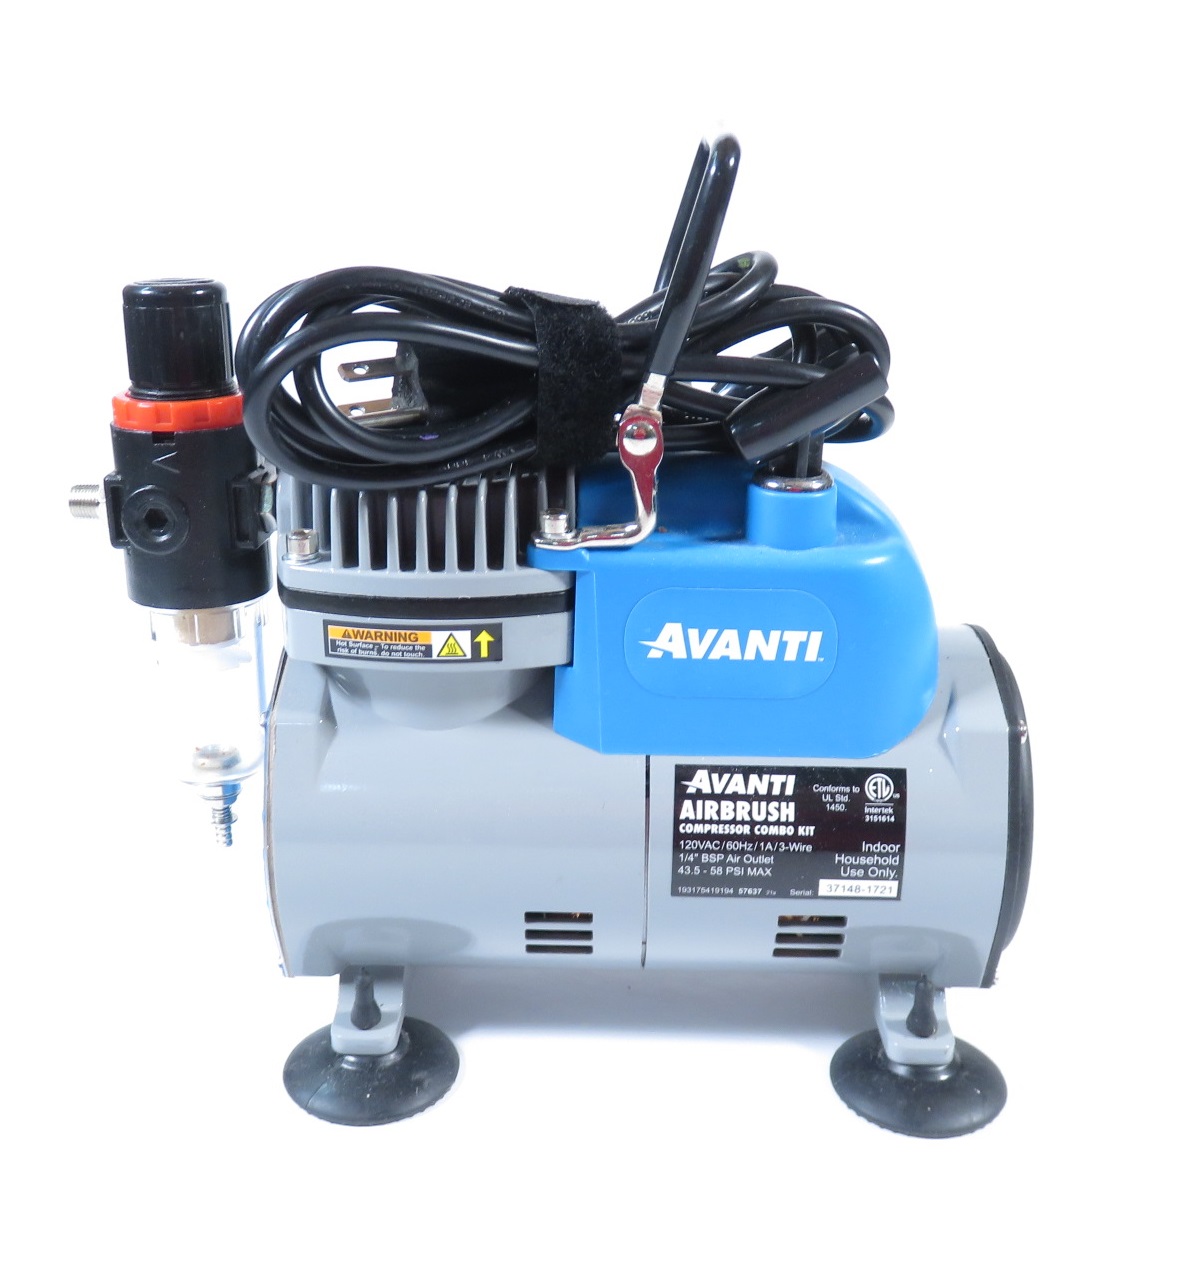 AVANTI Airbrush Compressor Combo Kit for $97.99 – Harbor Freight Coupons